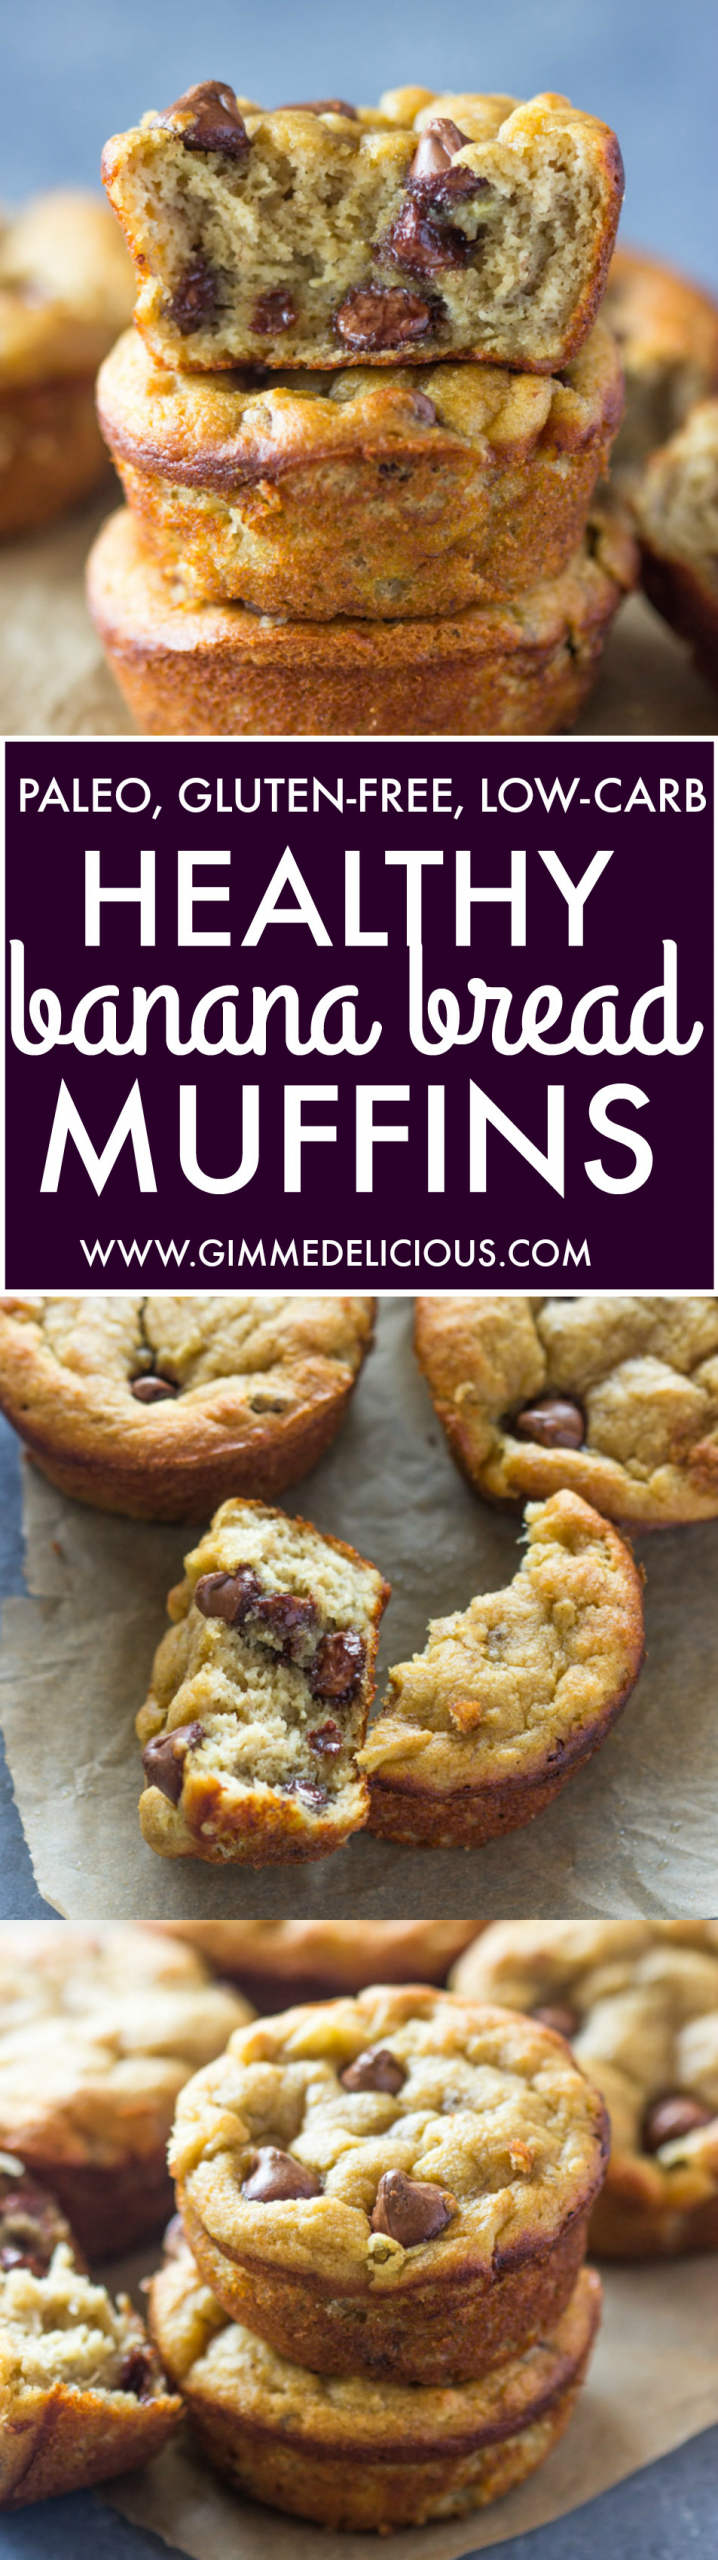 Low Carb Banana Bread Muffins
 The Best Paleo Banana Bread Muffins Gluten Free Low Carb